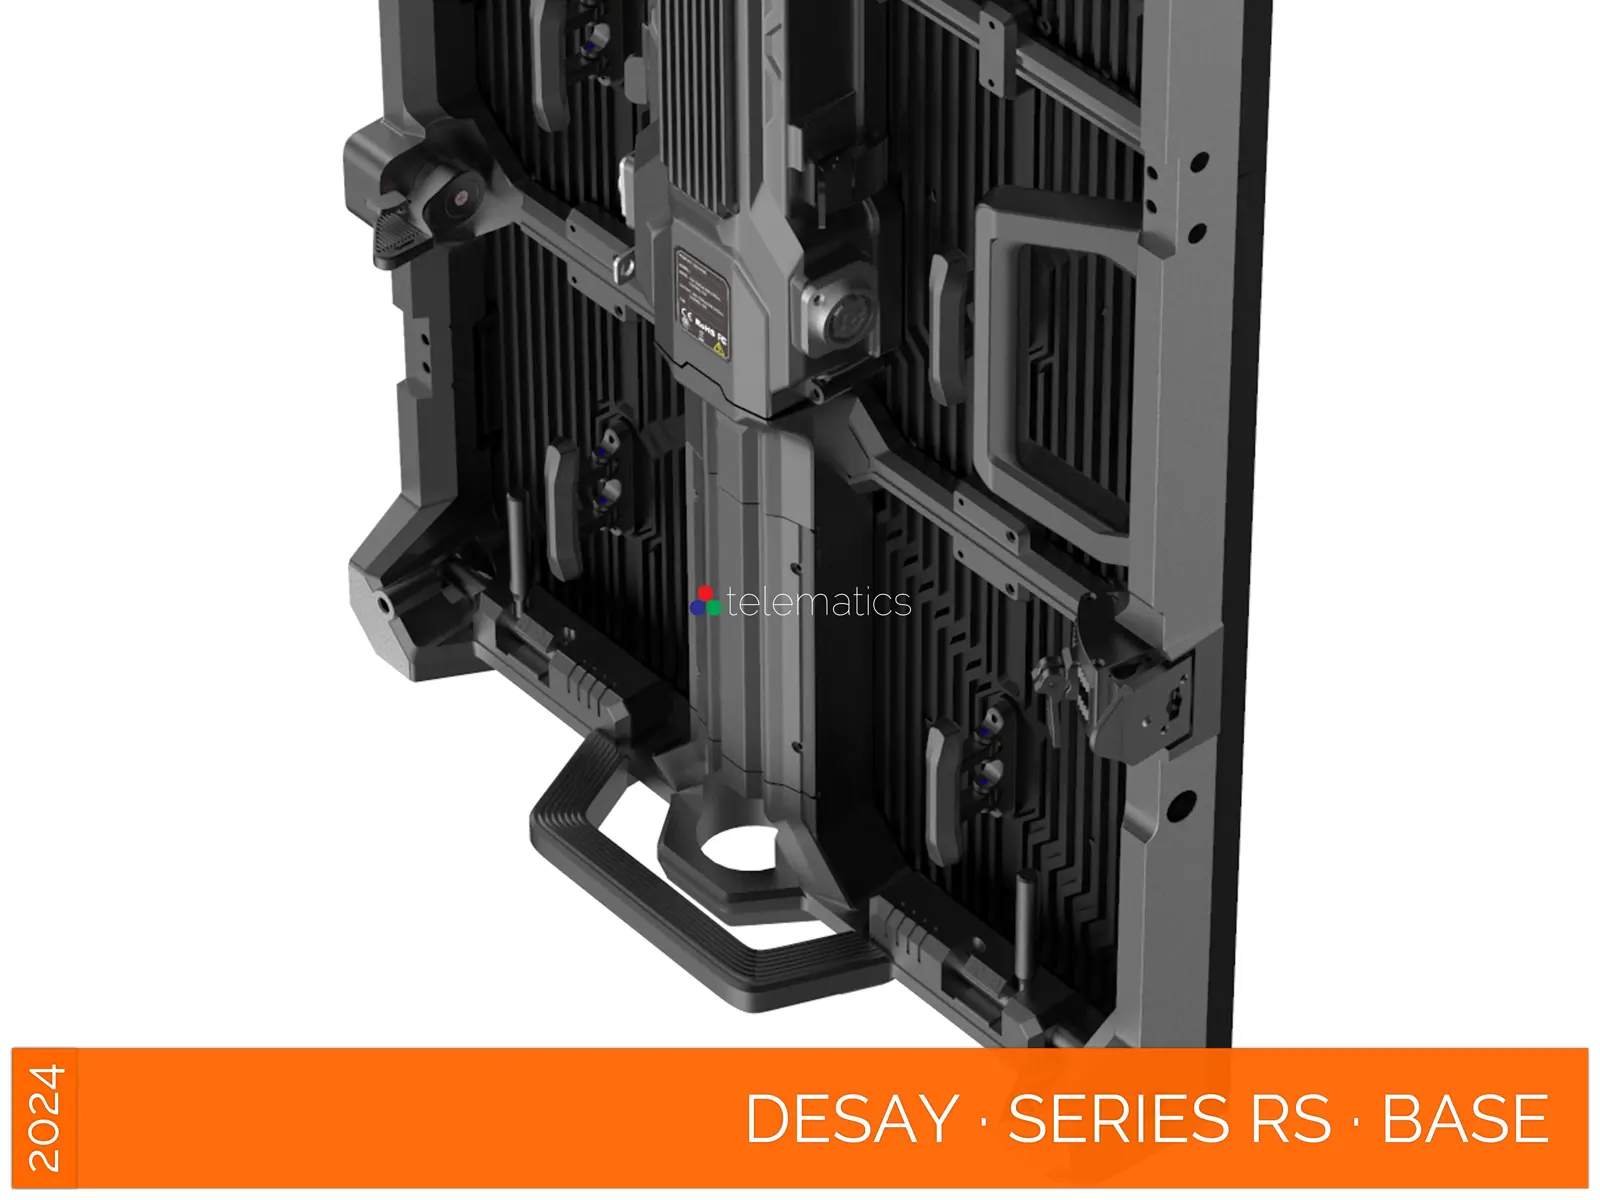 Desay · Series RS · Direct View LED Display Panel · Full Pixel Range · Rental Or Stage · Indoor Rated · Rapid Service And Setup · Built-in Footer Support · NovaStar COEX MX CX · Vision Management Platform · Viplex · review · price · cost · priced from $1,790 per square meter